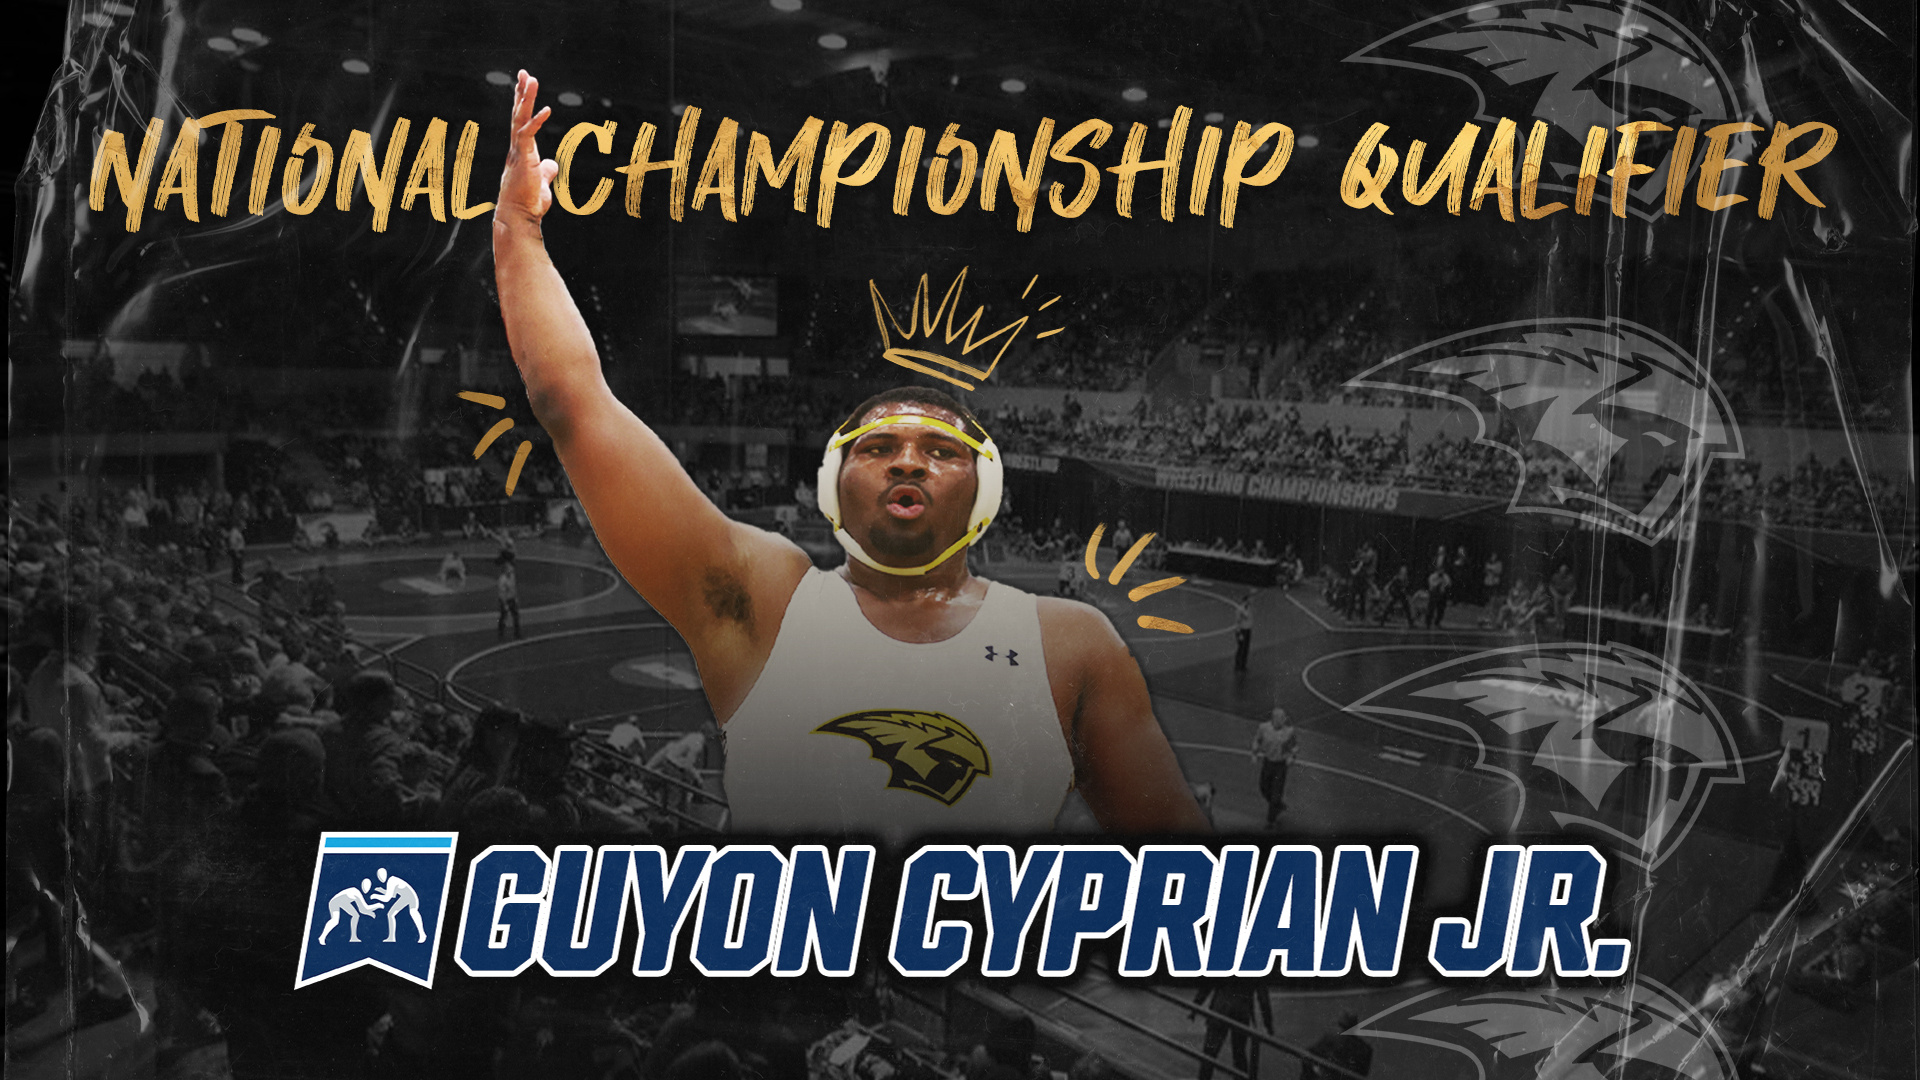 Cyprian Jr. To Wrestle At NCAA Championship